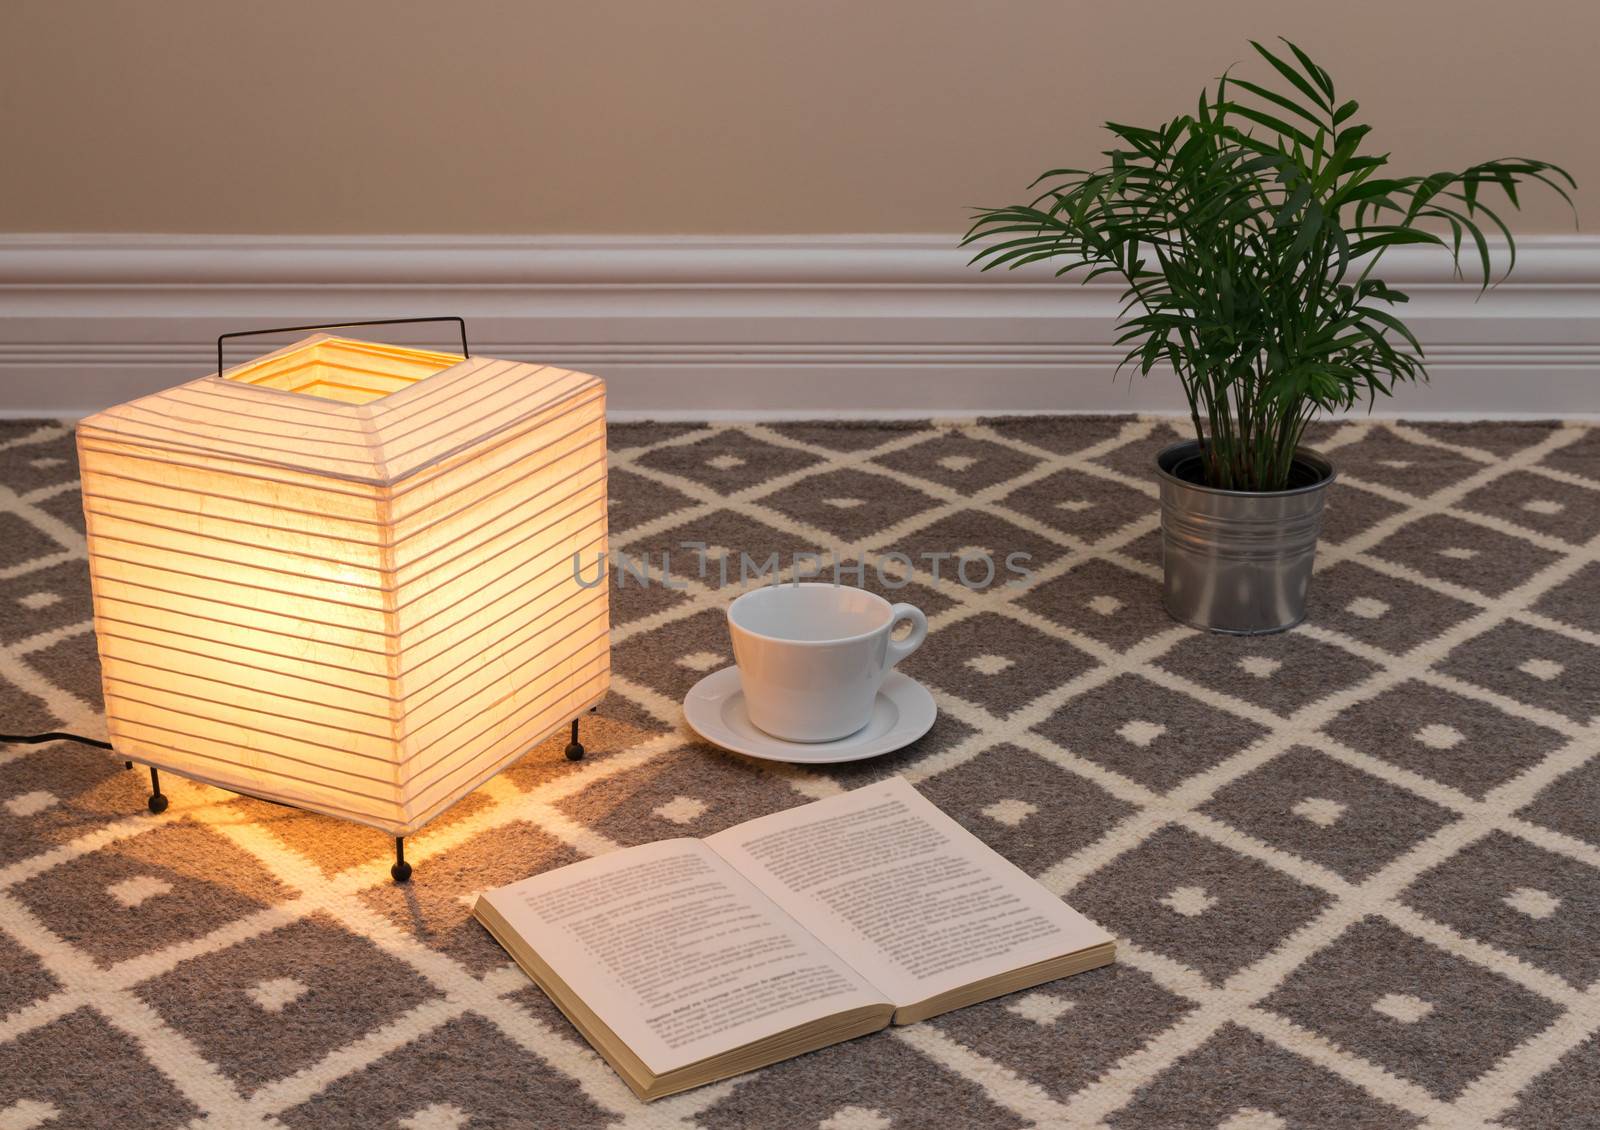 Lamp and a book to read on a carpet floor.